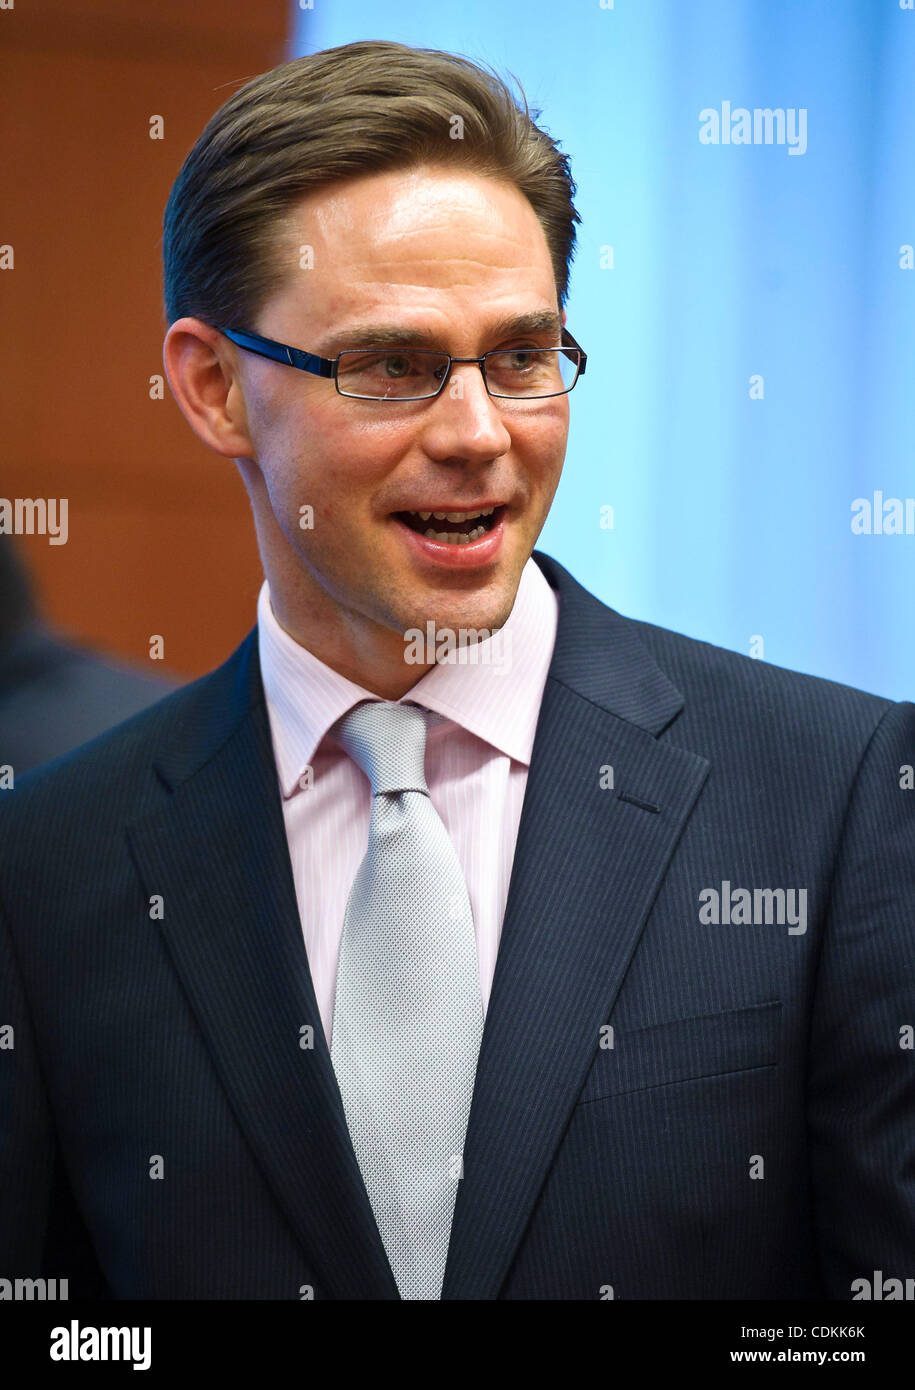 Mar. 21, 2011 - Brussels, BXL, Belgium - Finnish Finance Minister Jyrki Katainen  before a ministerial meeting on European Stability Mecanism at EU headquarters in Brussels  in  Brussels, Belgium on 2011-03-21 The extraordinary meeting of finance ministers of the eurozone will finalize discussions o Stock Photo